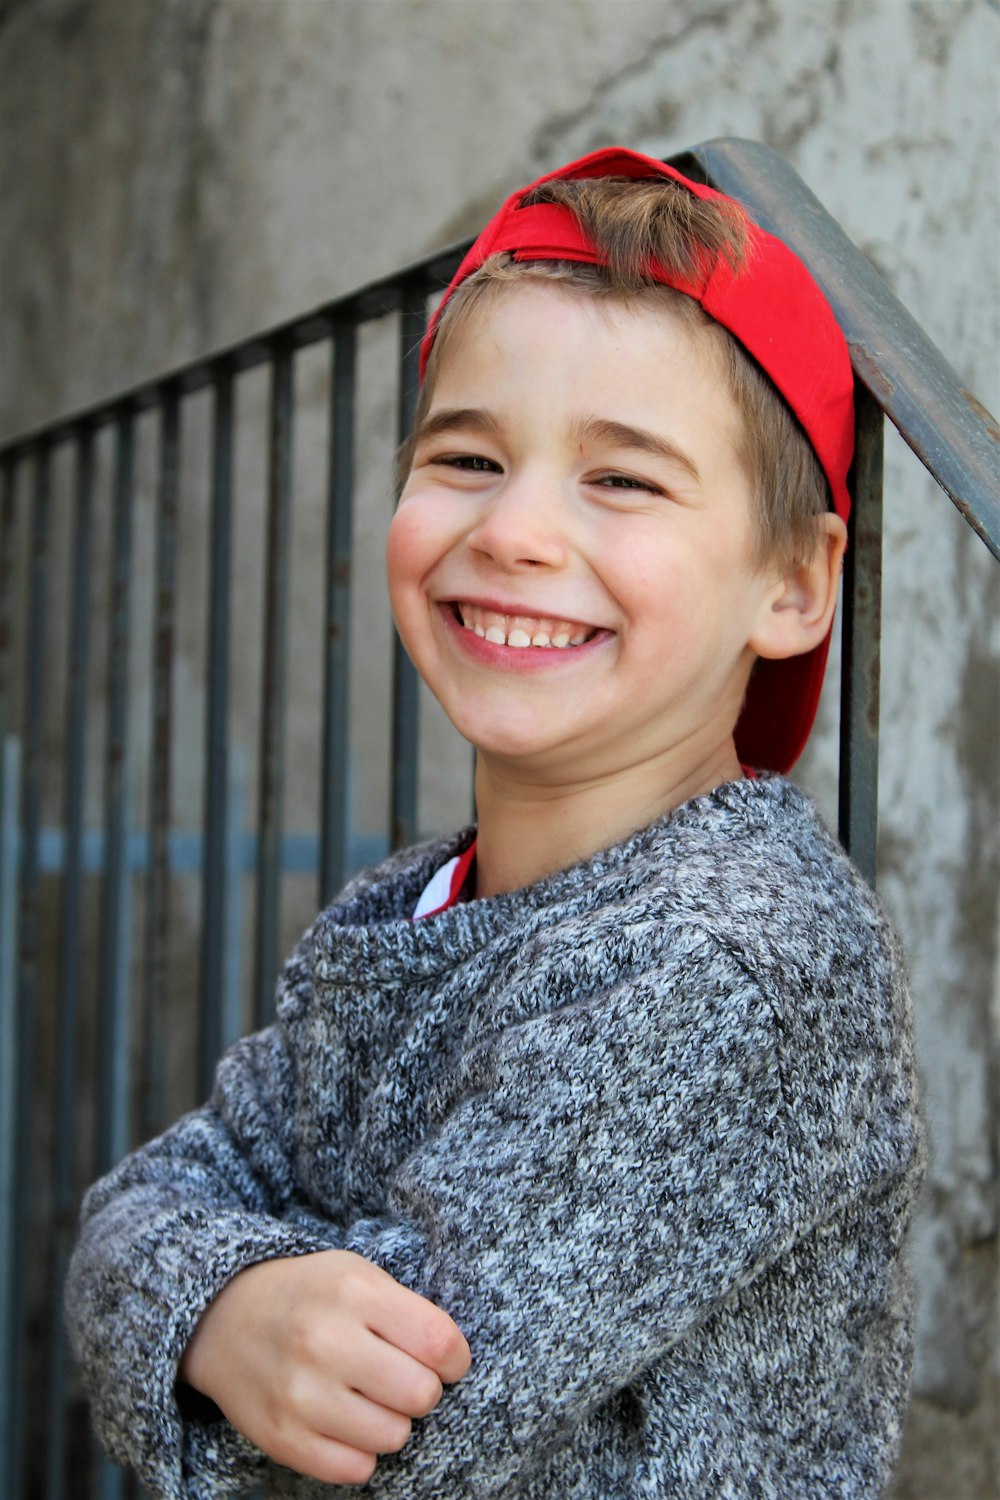 smiling boy in gray and black sweater wearing red cap